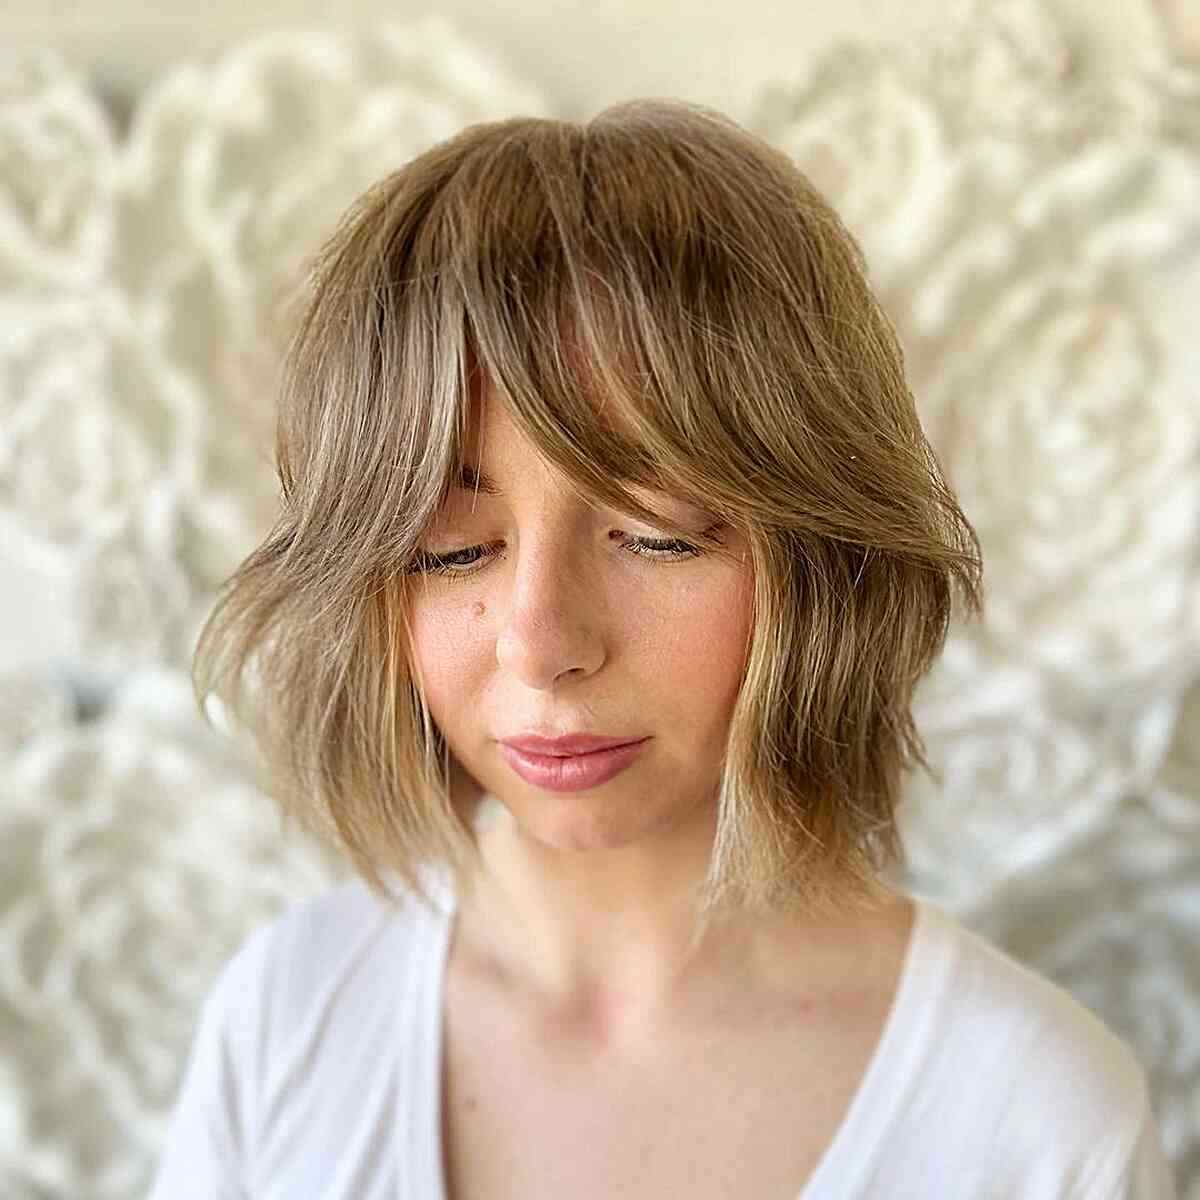 Short Textured Shaggy Bob with Middle-Parted Long Fringe